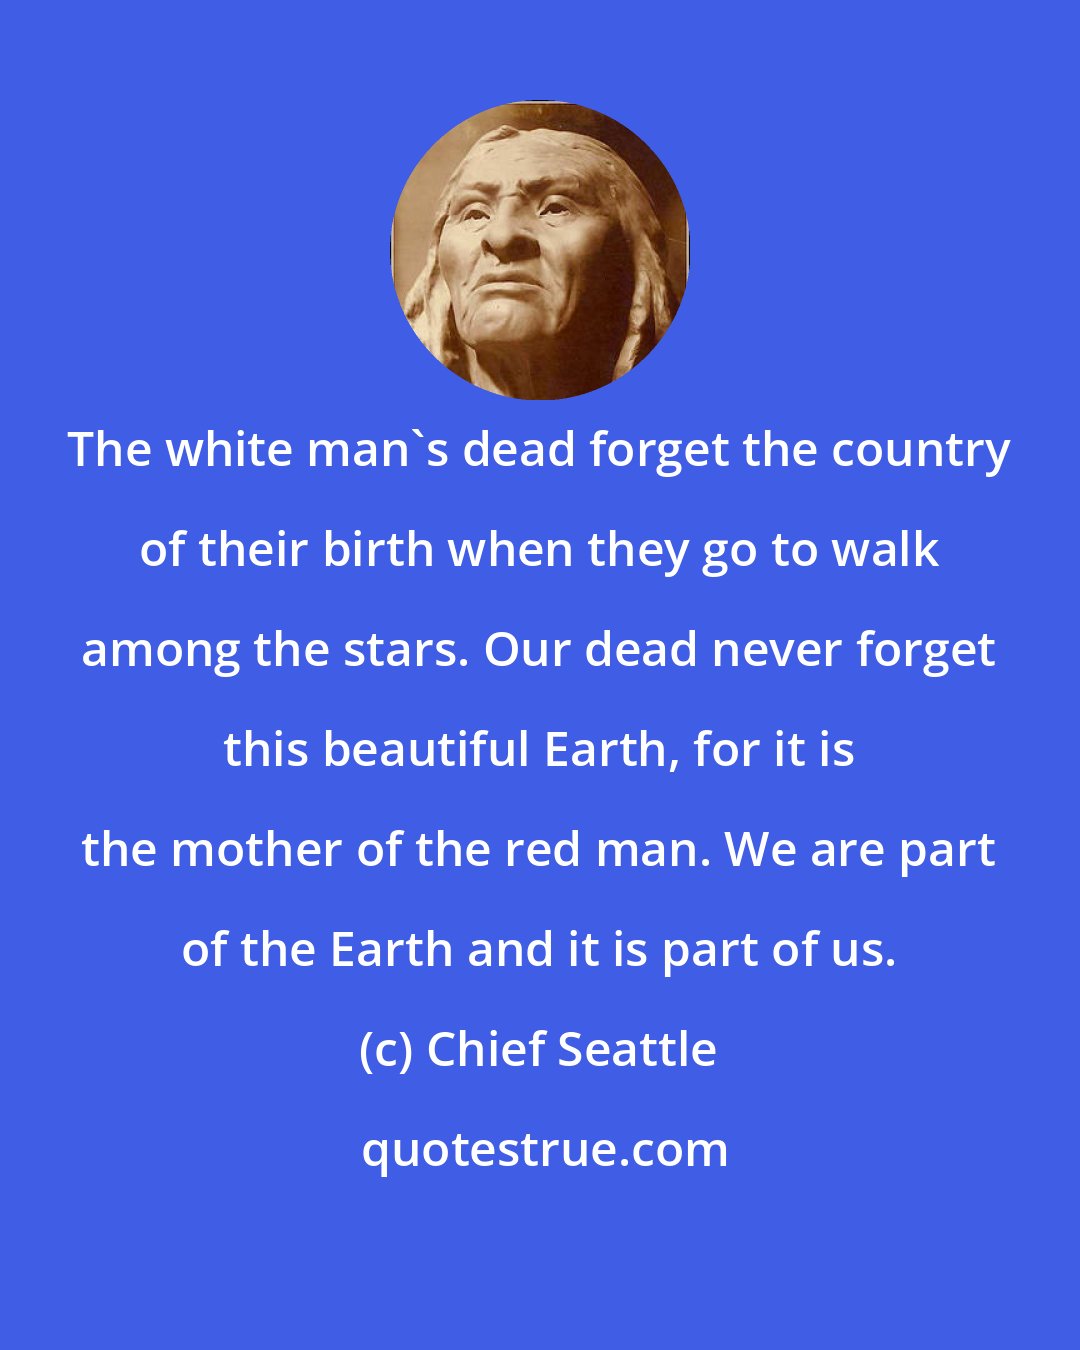 Chief Seattle: The white man's dead forget the country of their birth when they go to walk among the stars. Our dead never forget this beautiful Earth, for it is the mother of the red man. We are part of the Earth and it is part of us.